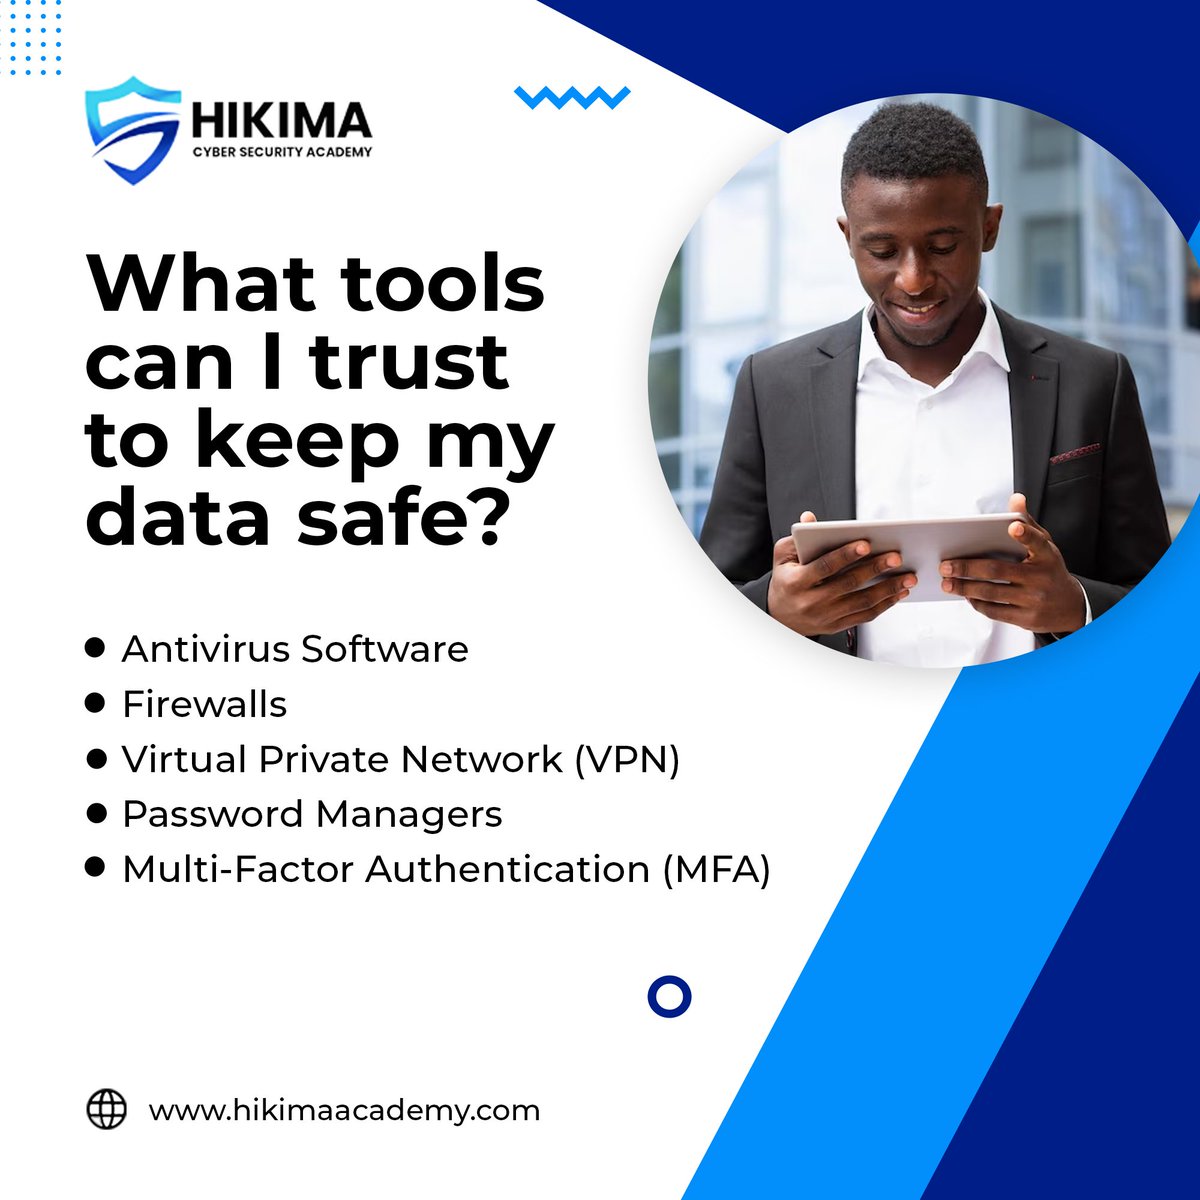 Lock down your data with confidence! Discover the trusted tools that keep your information safe and secure. 🔒 #CyberSecurity #DataProtection #TrustedTools #SecureSolutions